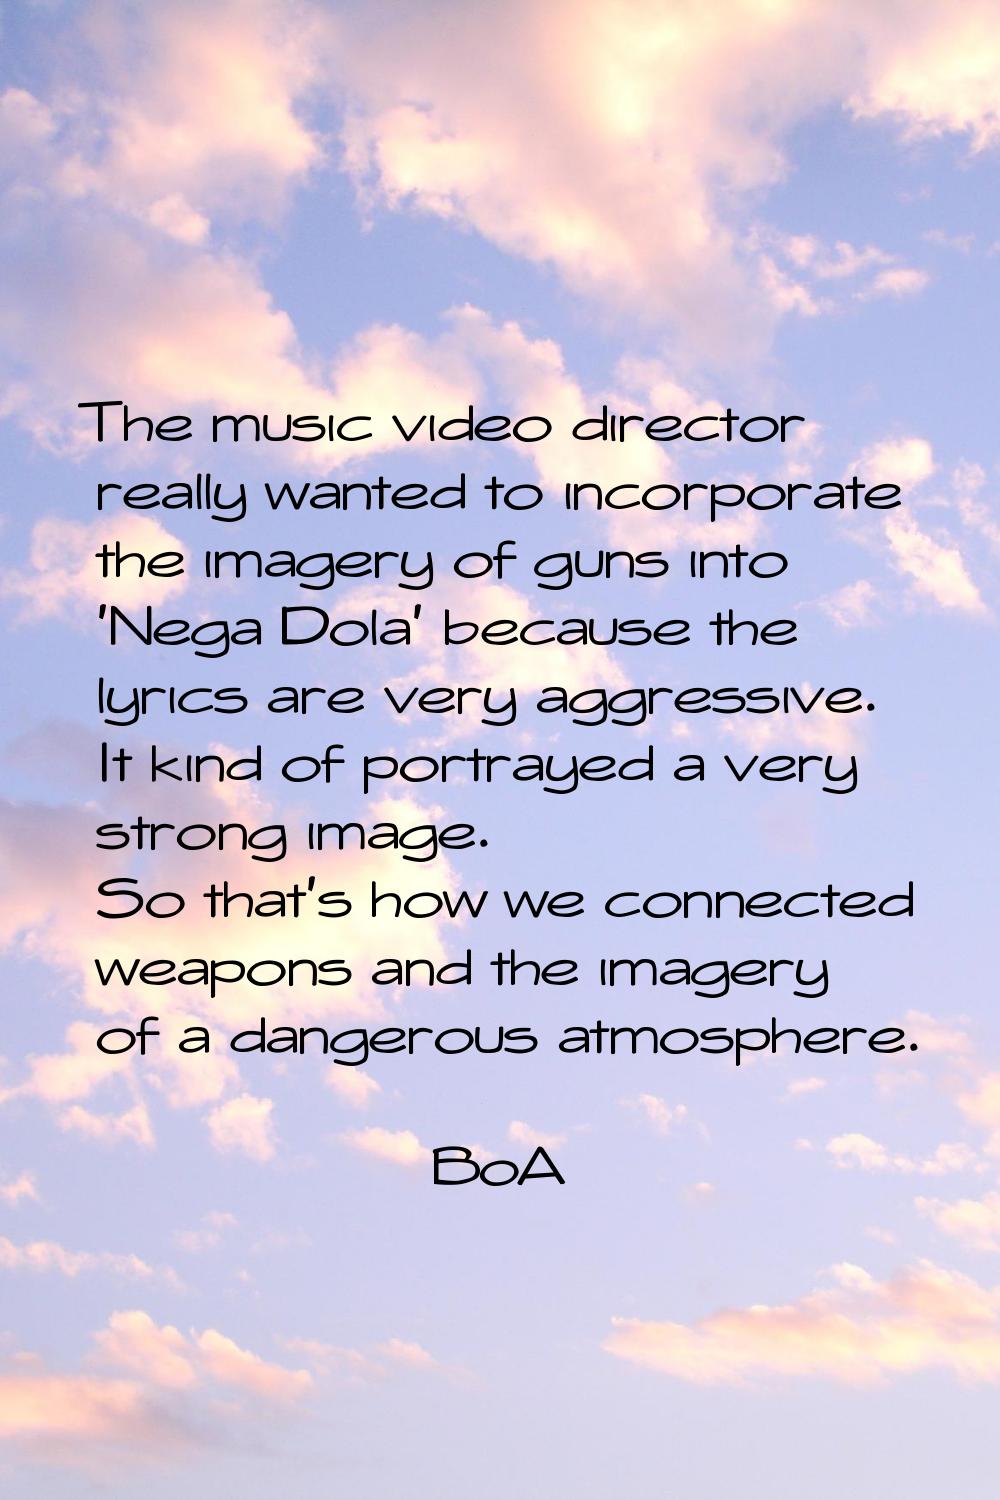 The music video director really wanted to incorporate the imagery of guns into 'Nega Dola' because 